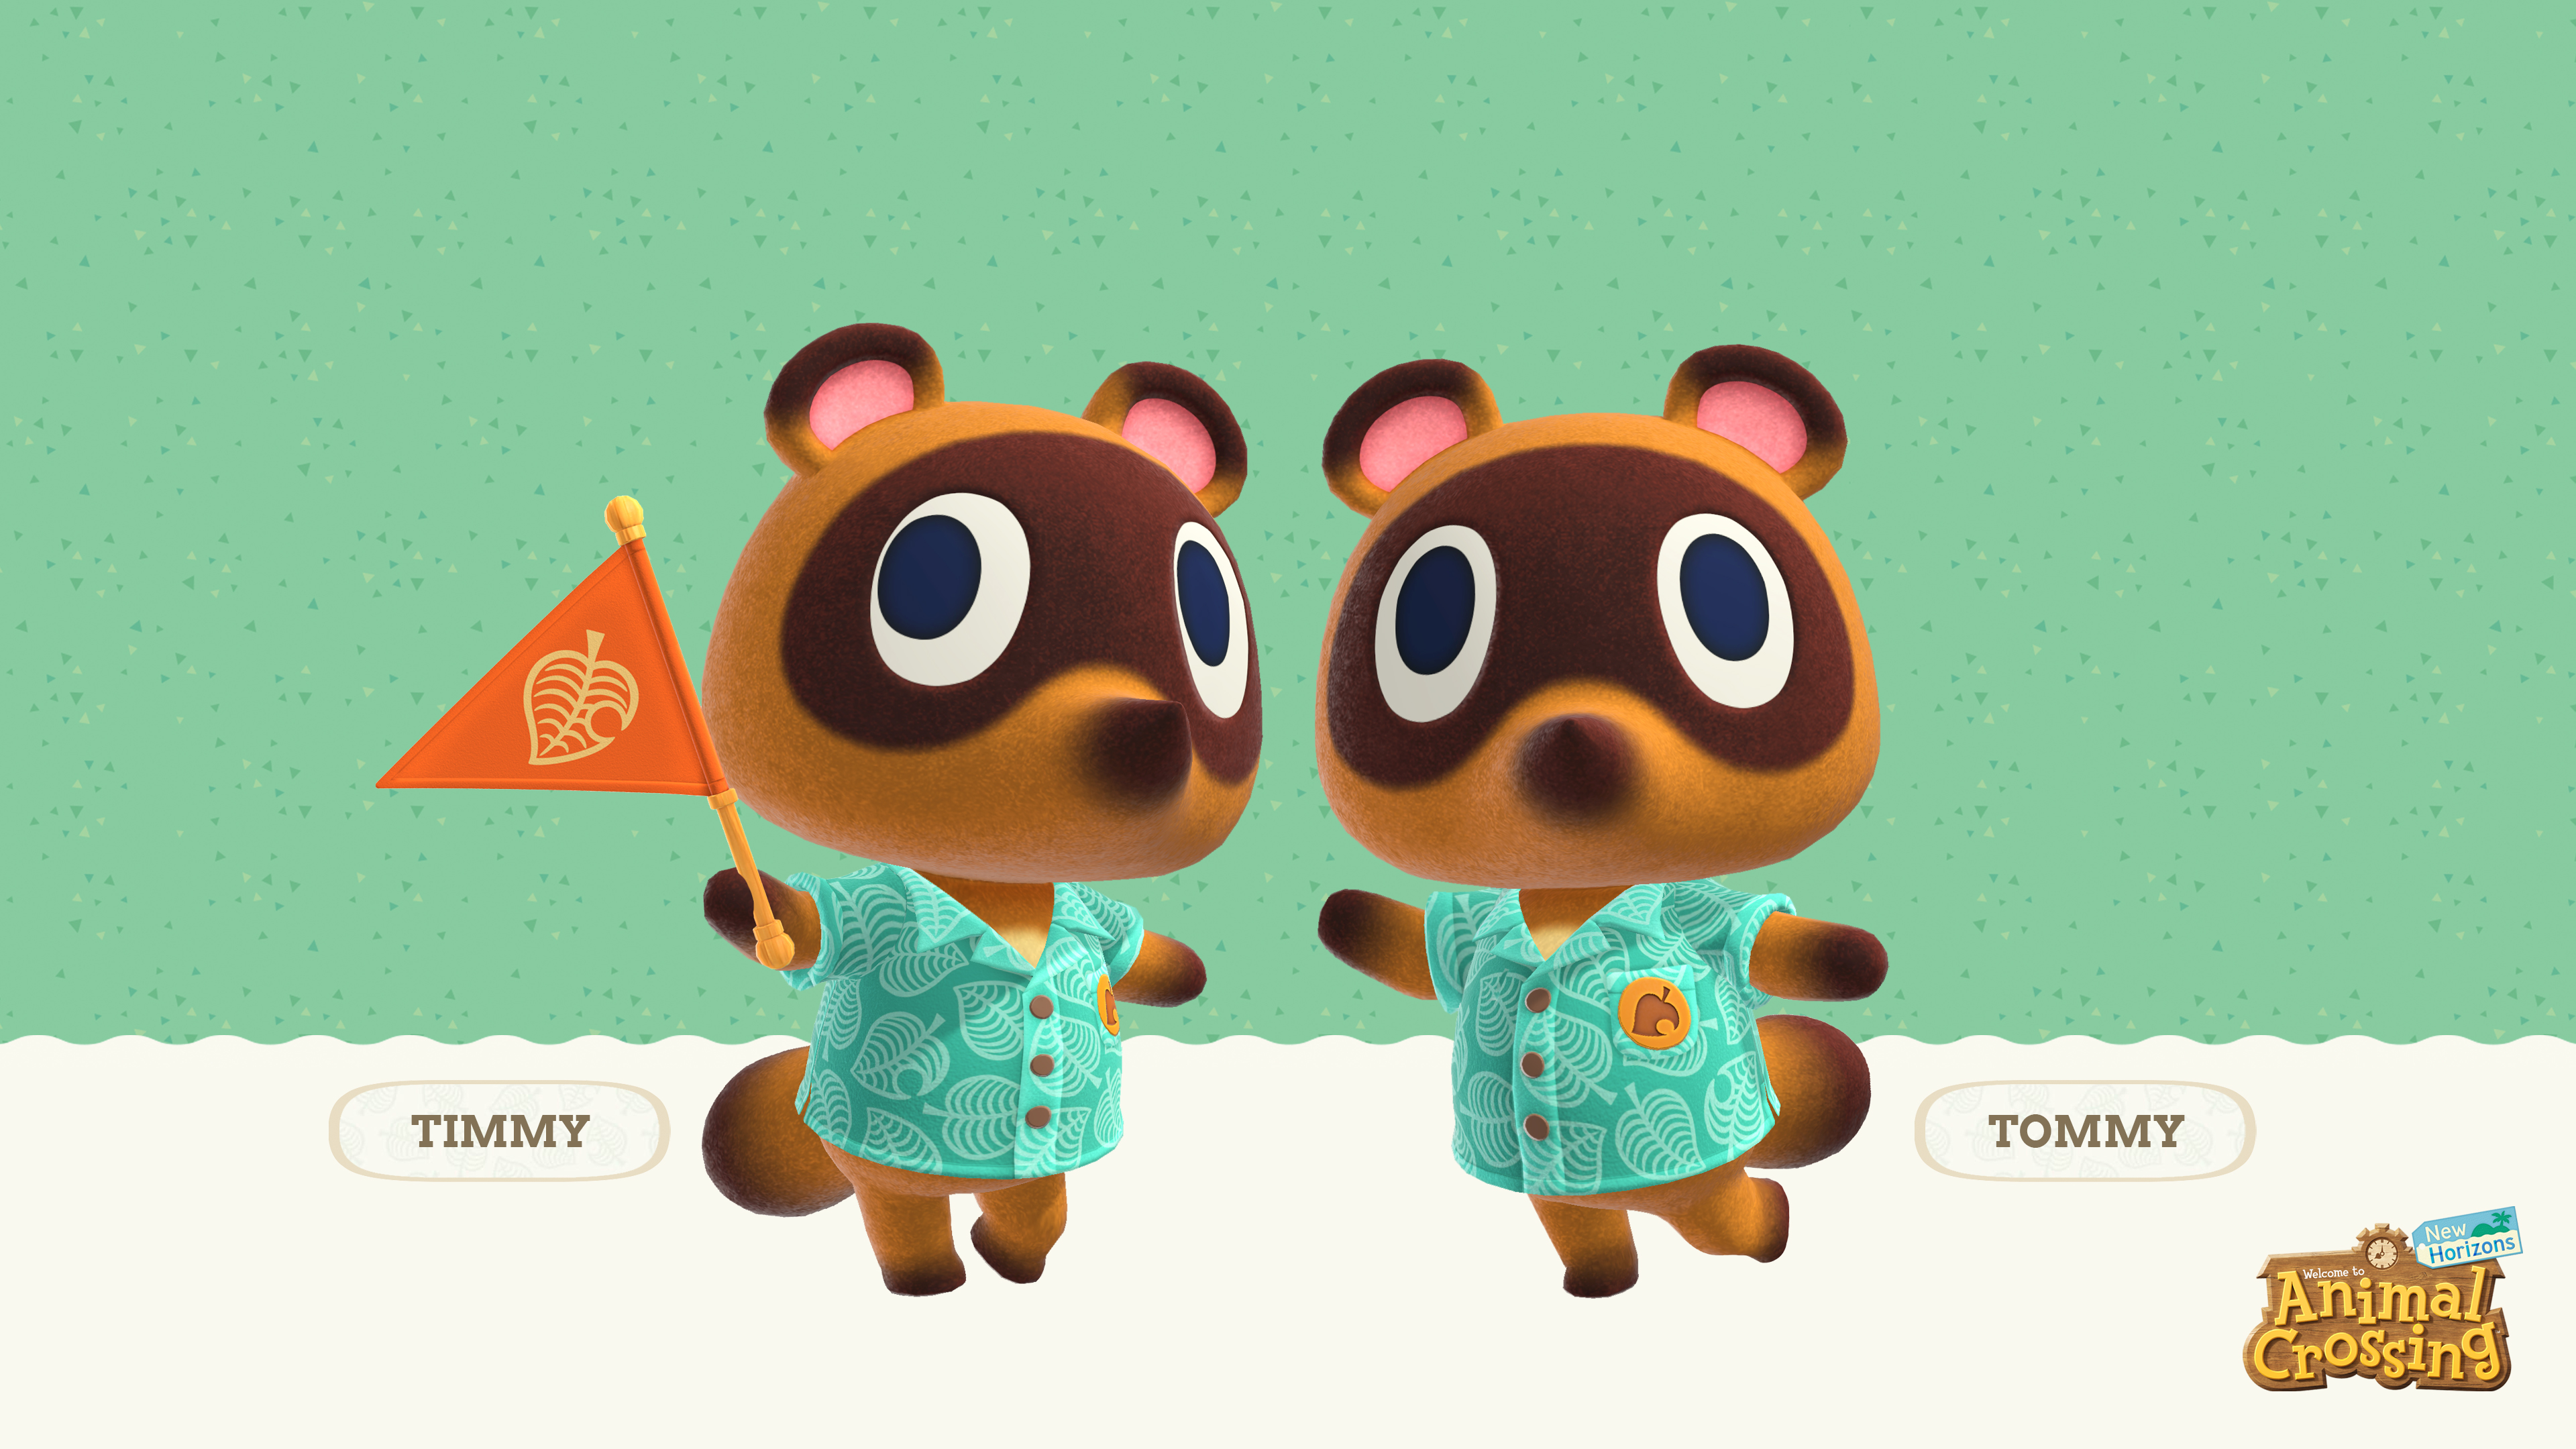 timmy and tommy from animal crossing wallpaper, animal crossing wallpapers.